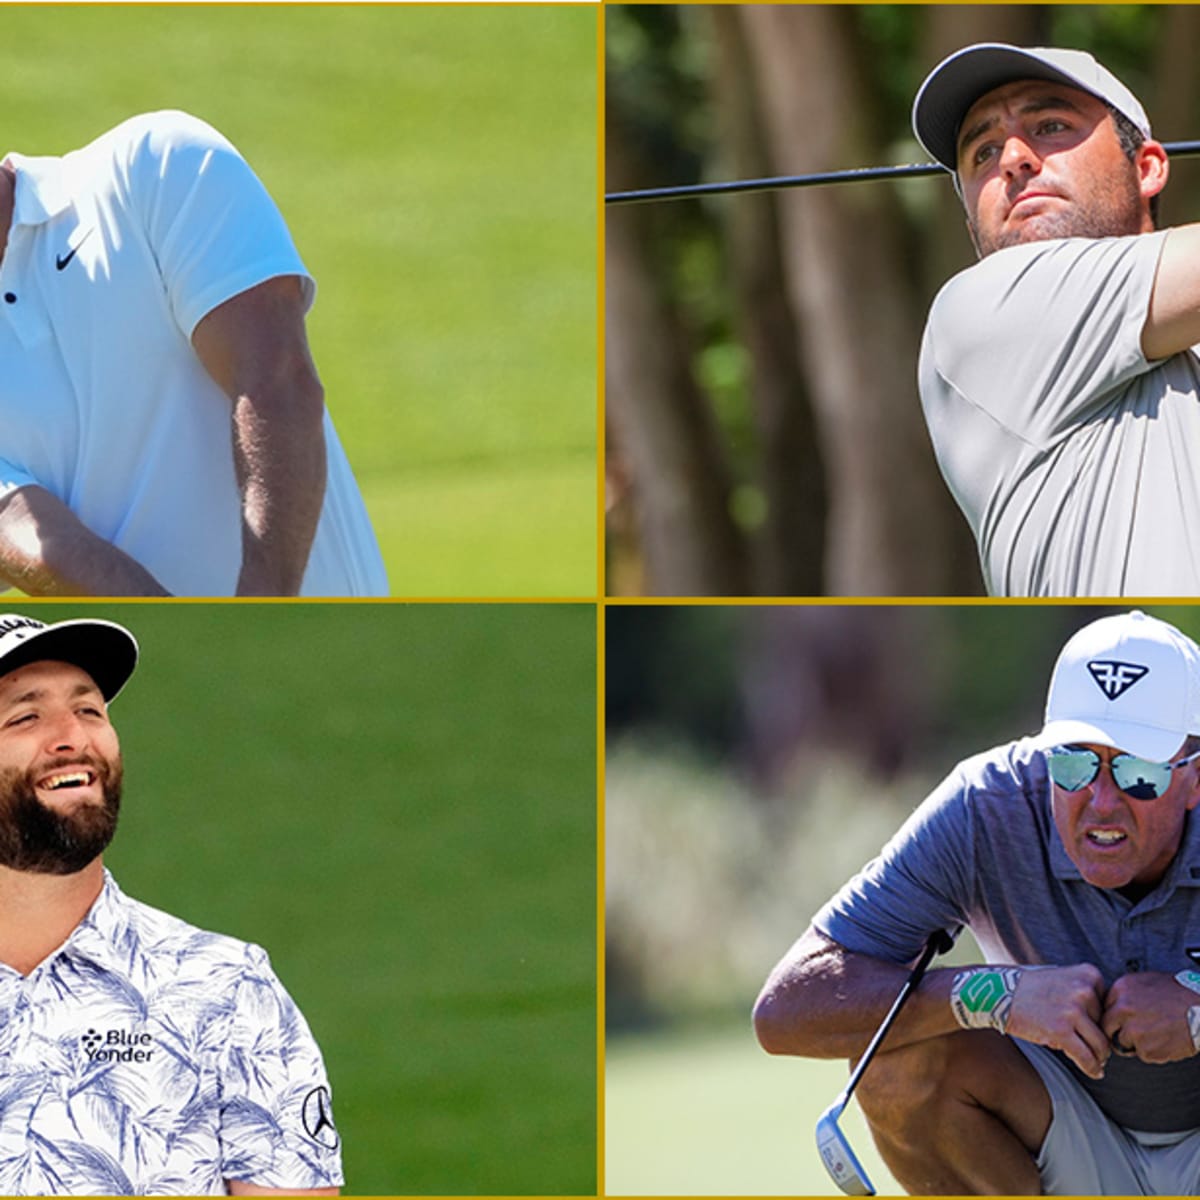 PGA Championship 2023: The top 100 golfers competing at Oak Hill